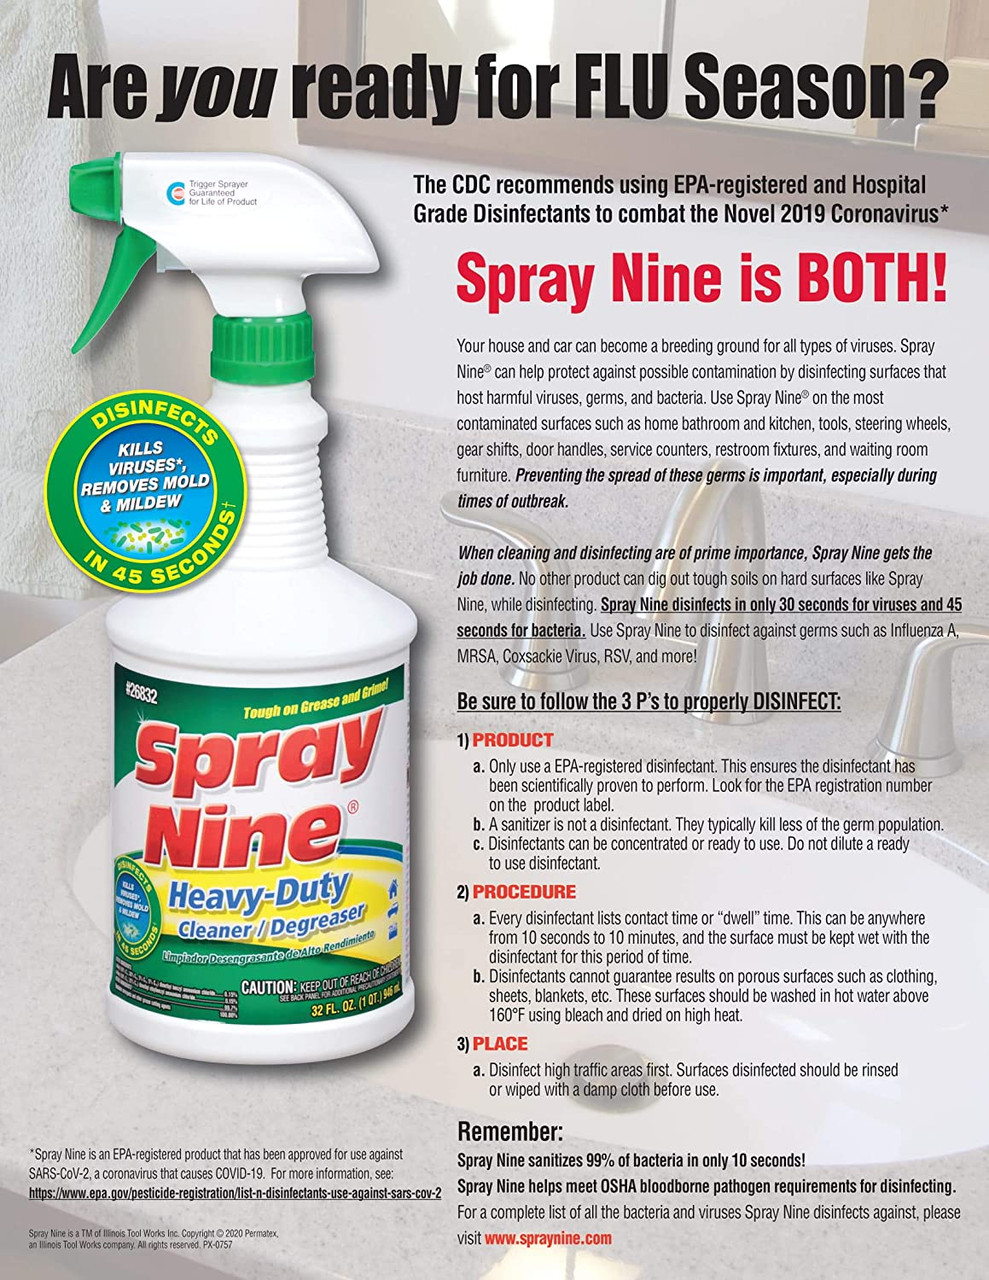 Spray Nine 26825 Multi-Purpose degreaser and Disinfectant, 22 oz.